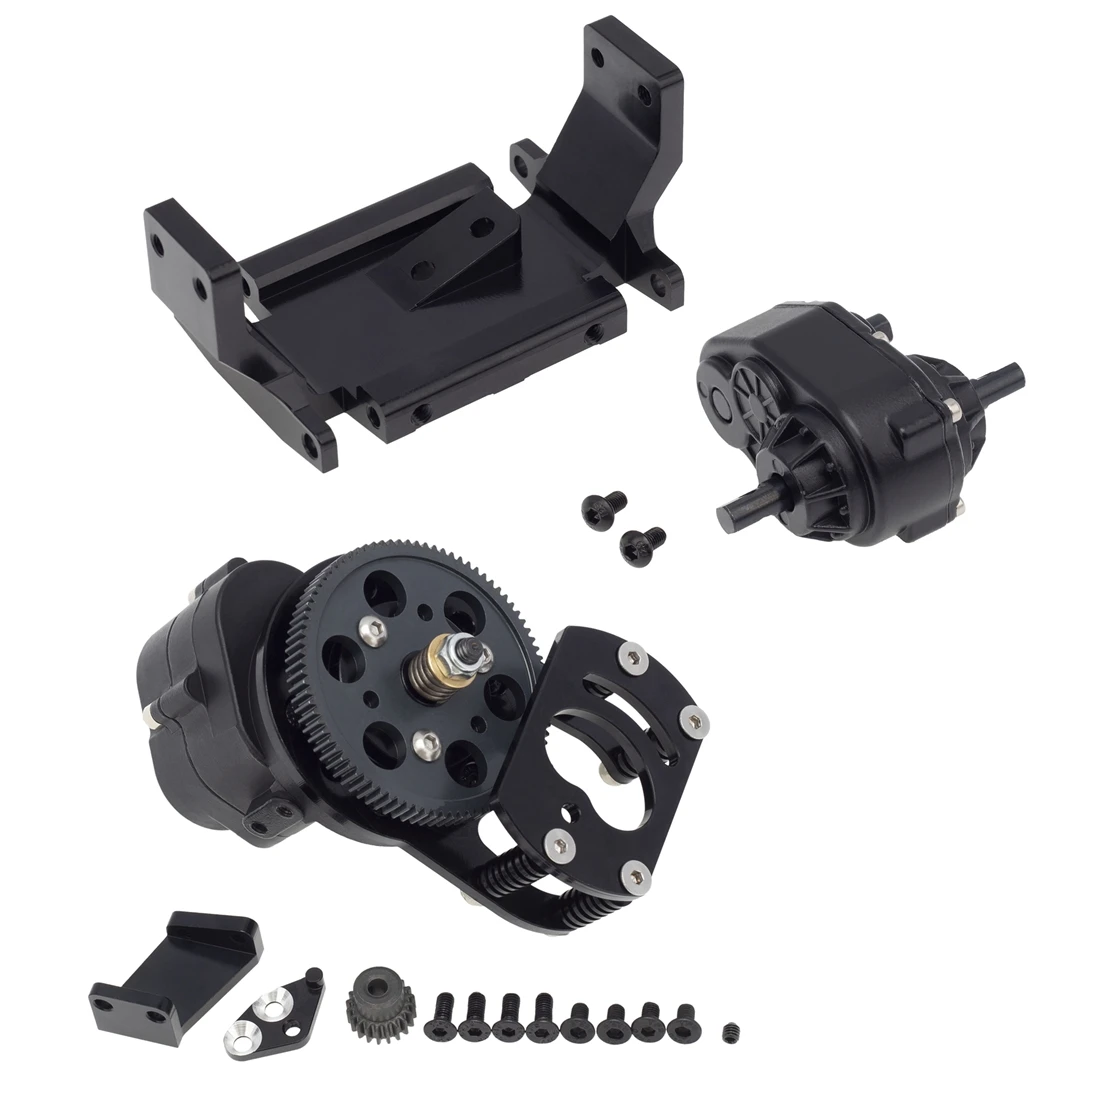 Metal R3 Single Speed Gearbox and Transfer Case Set for RC4WD D90 Gelande II D110 G2 FJ40 1/10 RC Crawler Car Upgrades,1